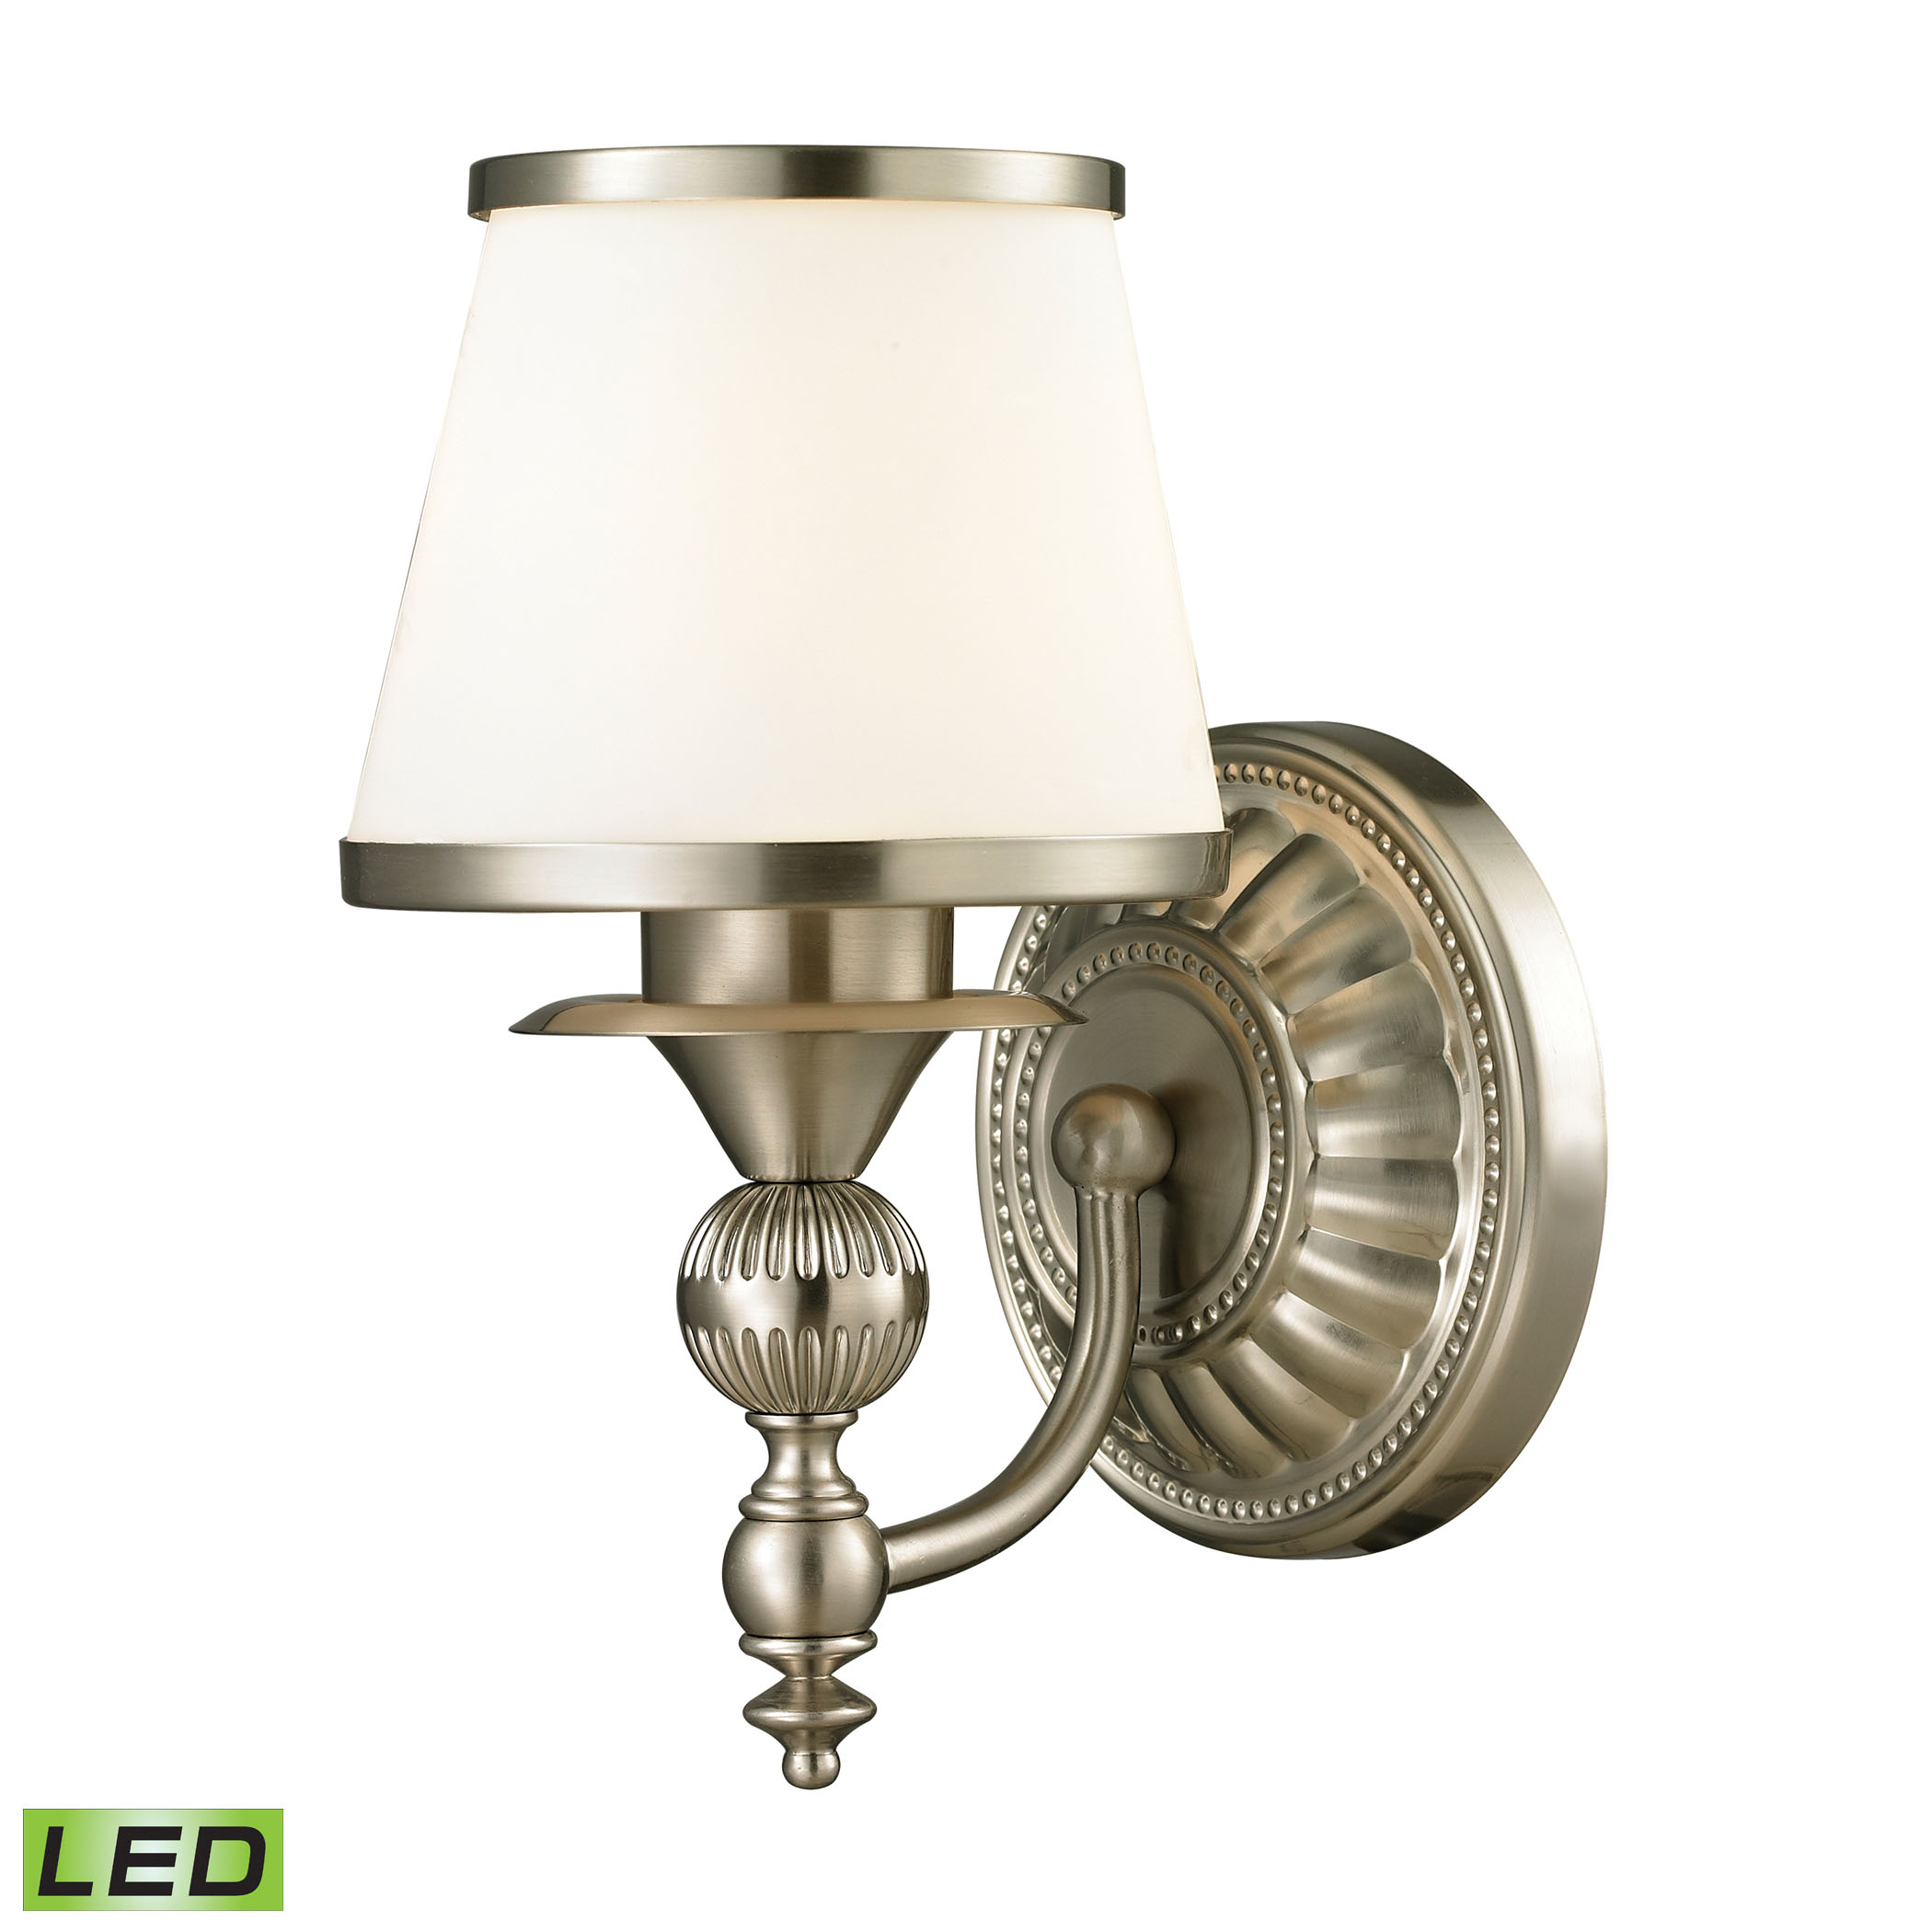 Smithfield Collection 1 Light Bath in Brushed Nickel - LED Offering Up To 800 Lumens (60 Watt Equivalent)